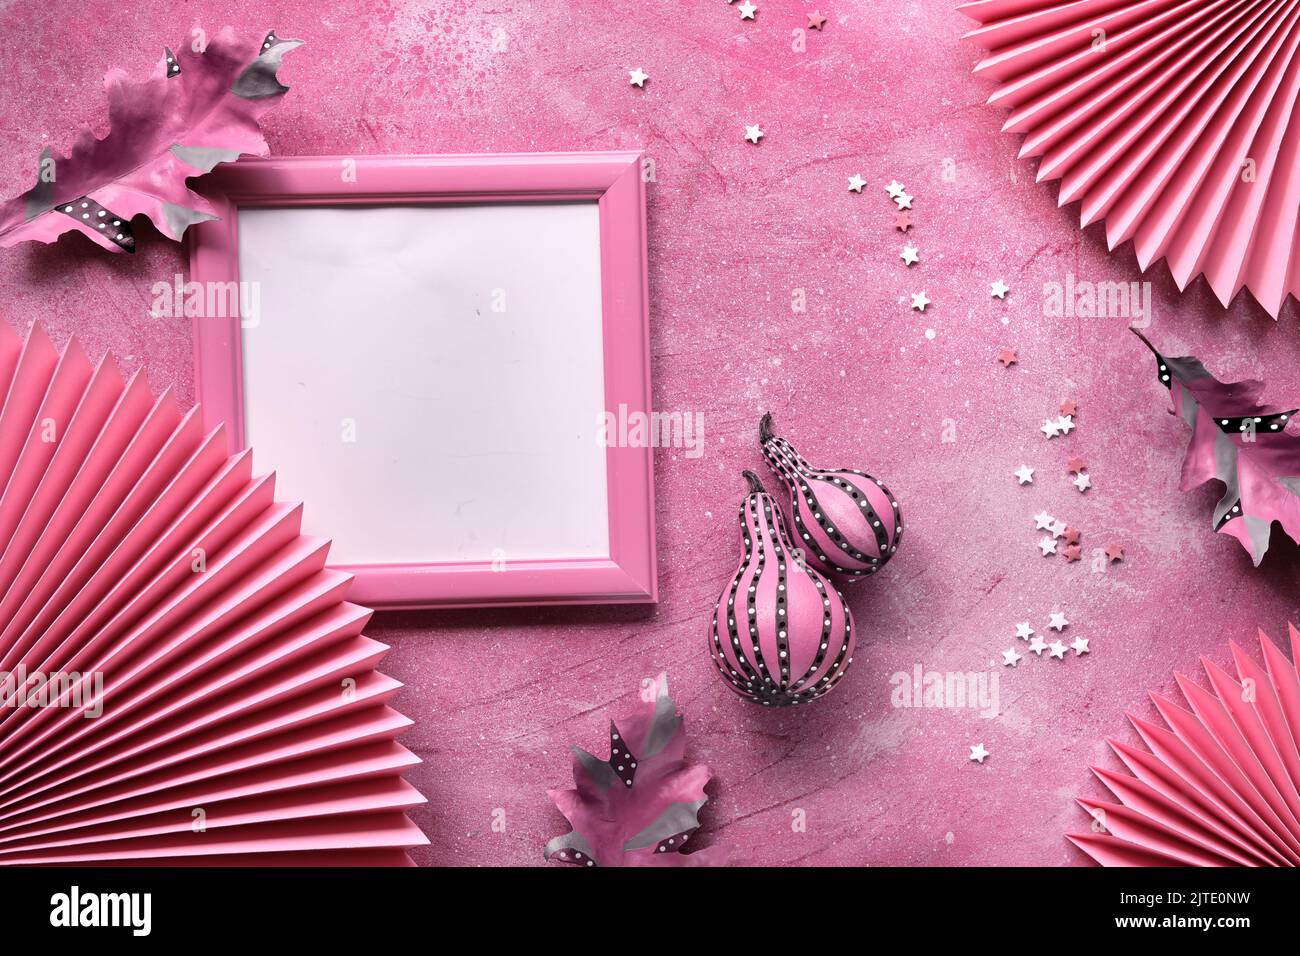 Pink blank picture frame with Autumn stripy pumpkins, Fall dry leaves. Paper fans, sugar sprinkles on pink textured monochromatic background. Stock Photo